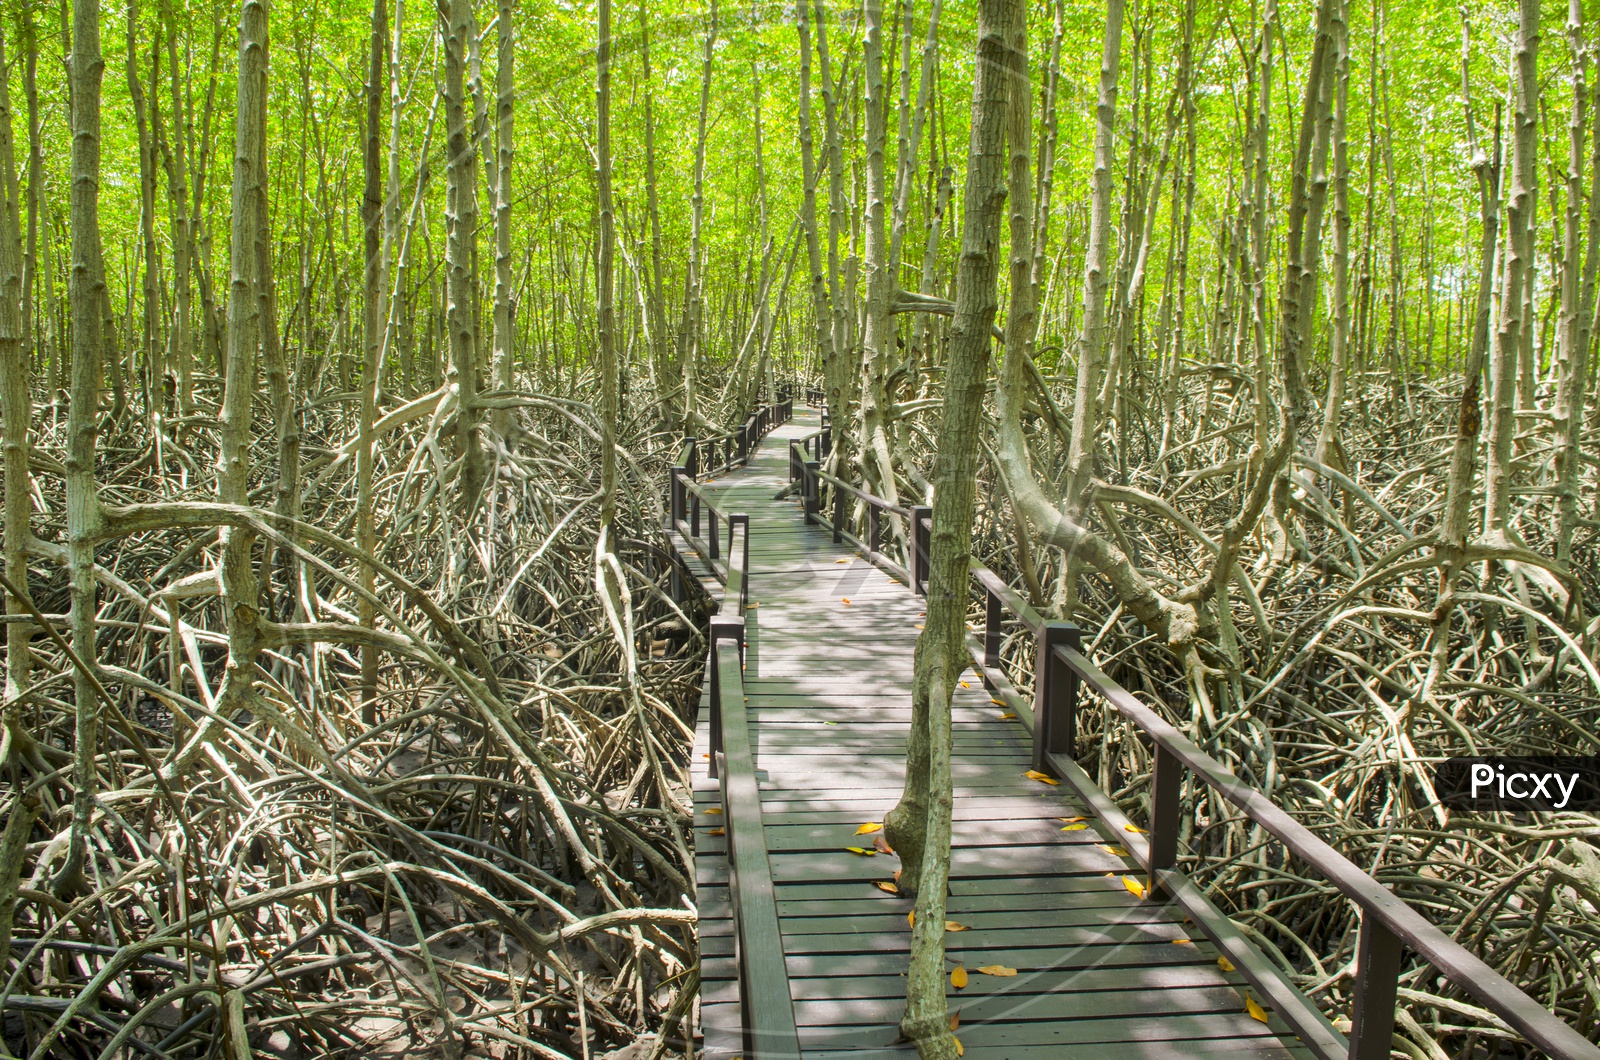 Wood path way among the Mangrove forest, Thailand